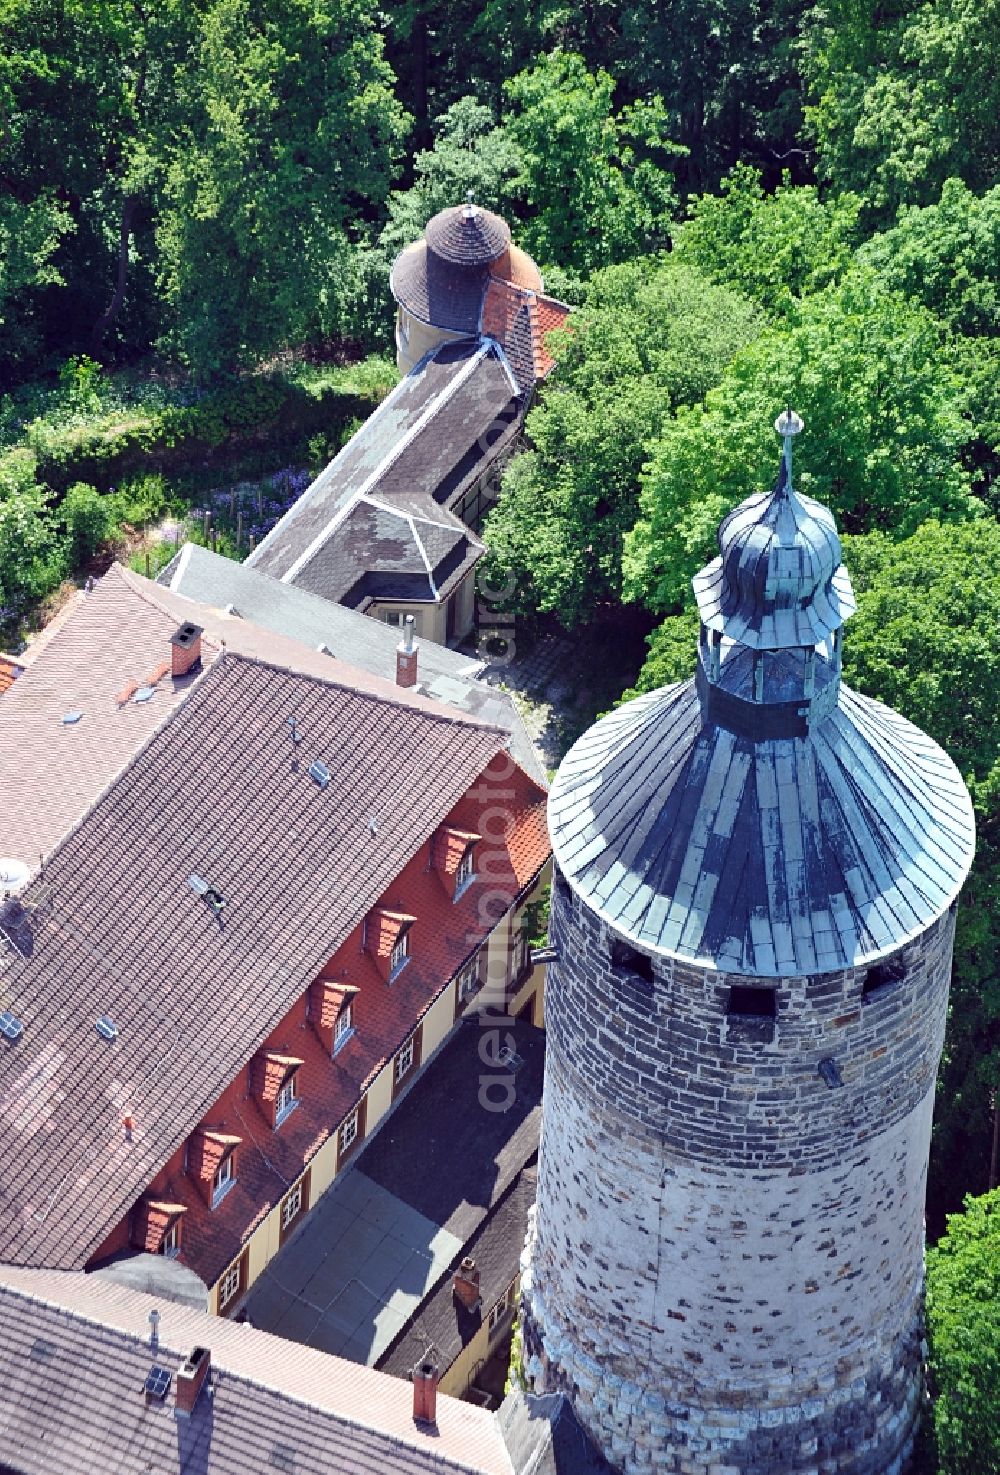 Tonndorf from the bird's eye view: Castle Tonndorf in the town of Tonndorf in Thuringia